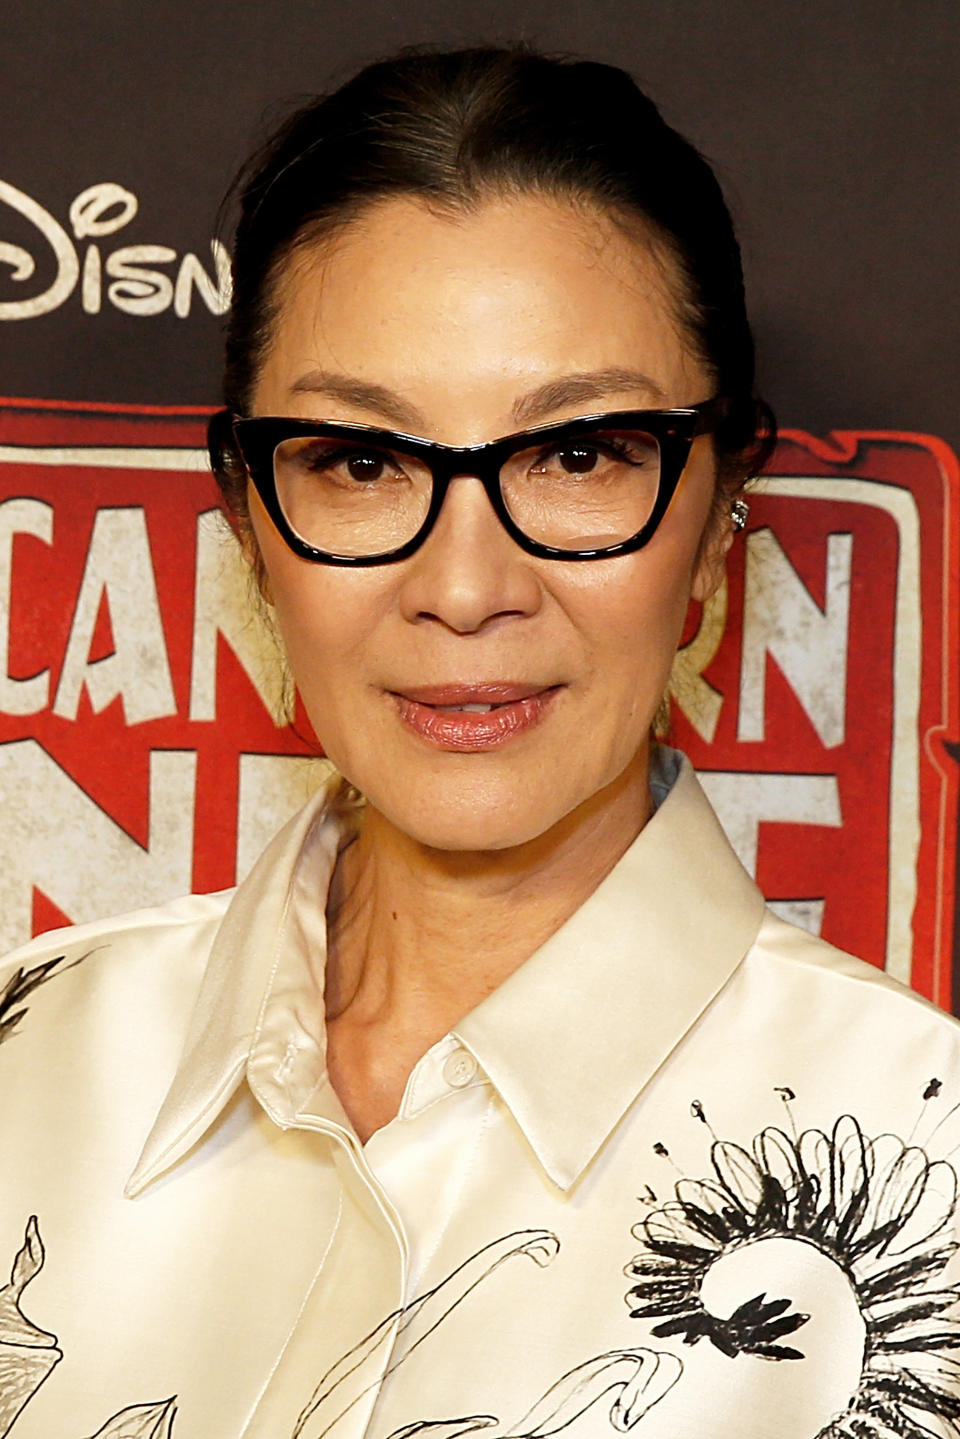 Michelle Yeoh attends the Disney+ Original Series "American Born Chinese" New York premiere at Radio City Music Hall